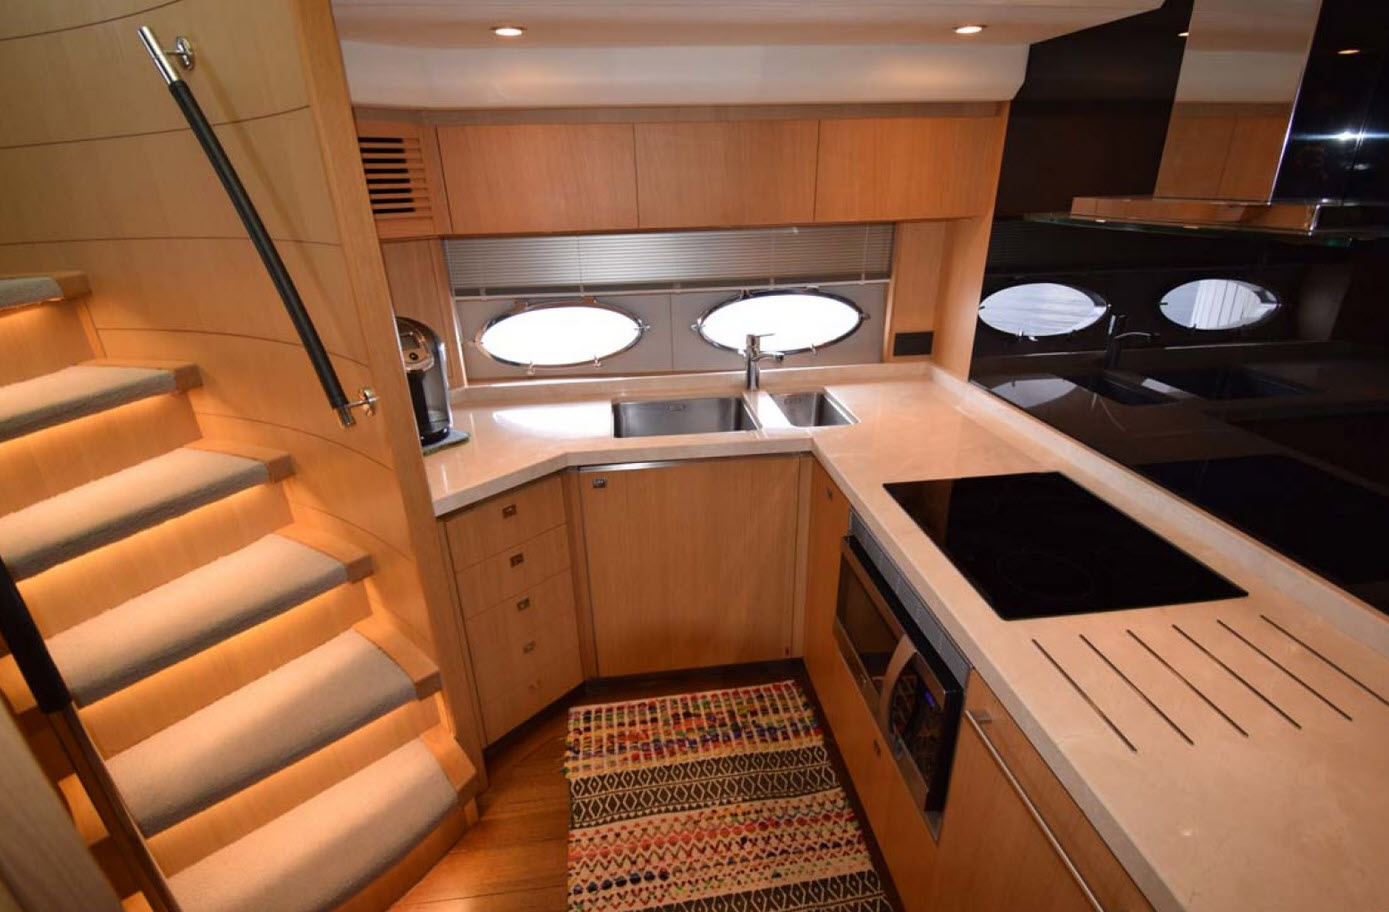 Galley on the princess yachts v72